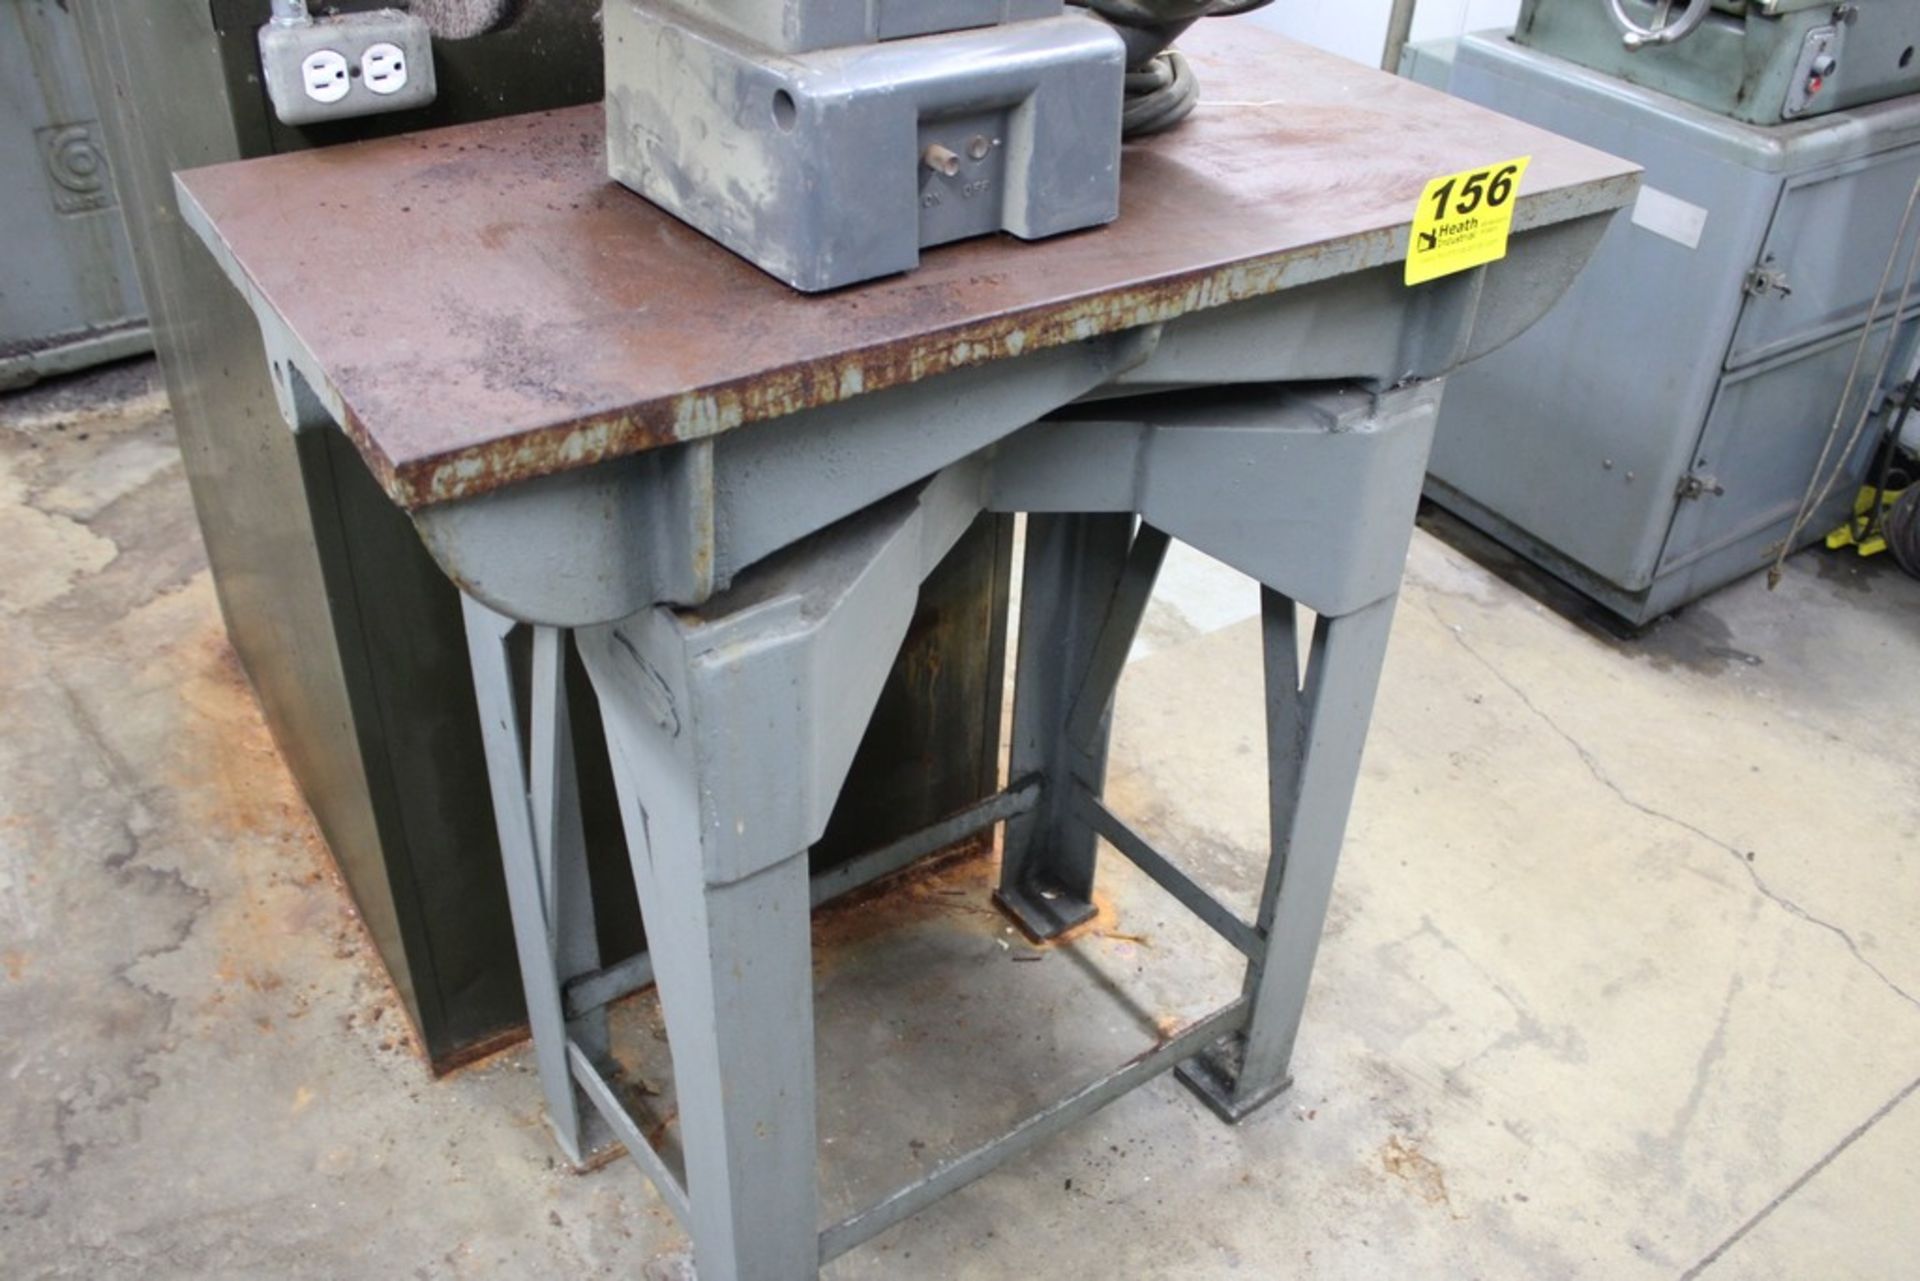 36" X 18" CAST IRON SURFACE PLATE WITH STEEL STAND - Image 2 of 3